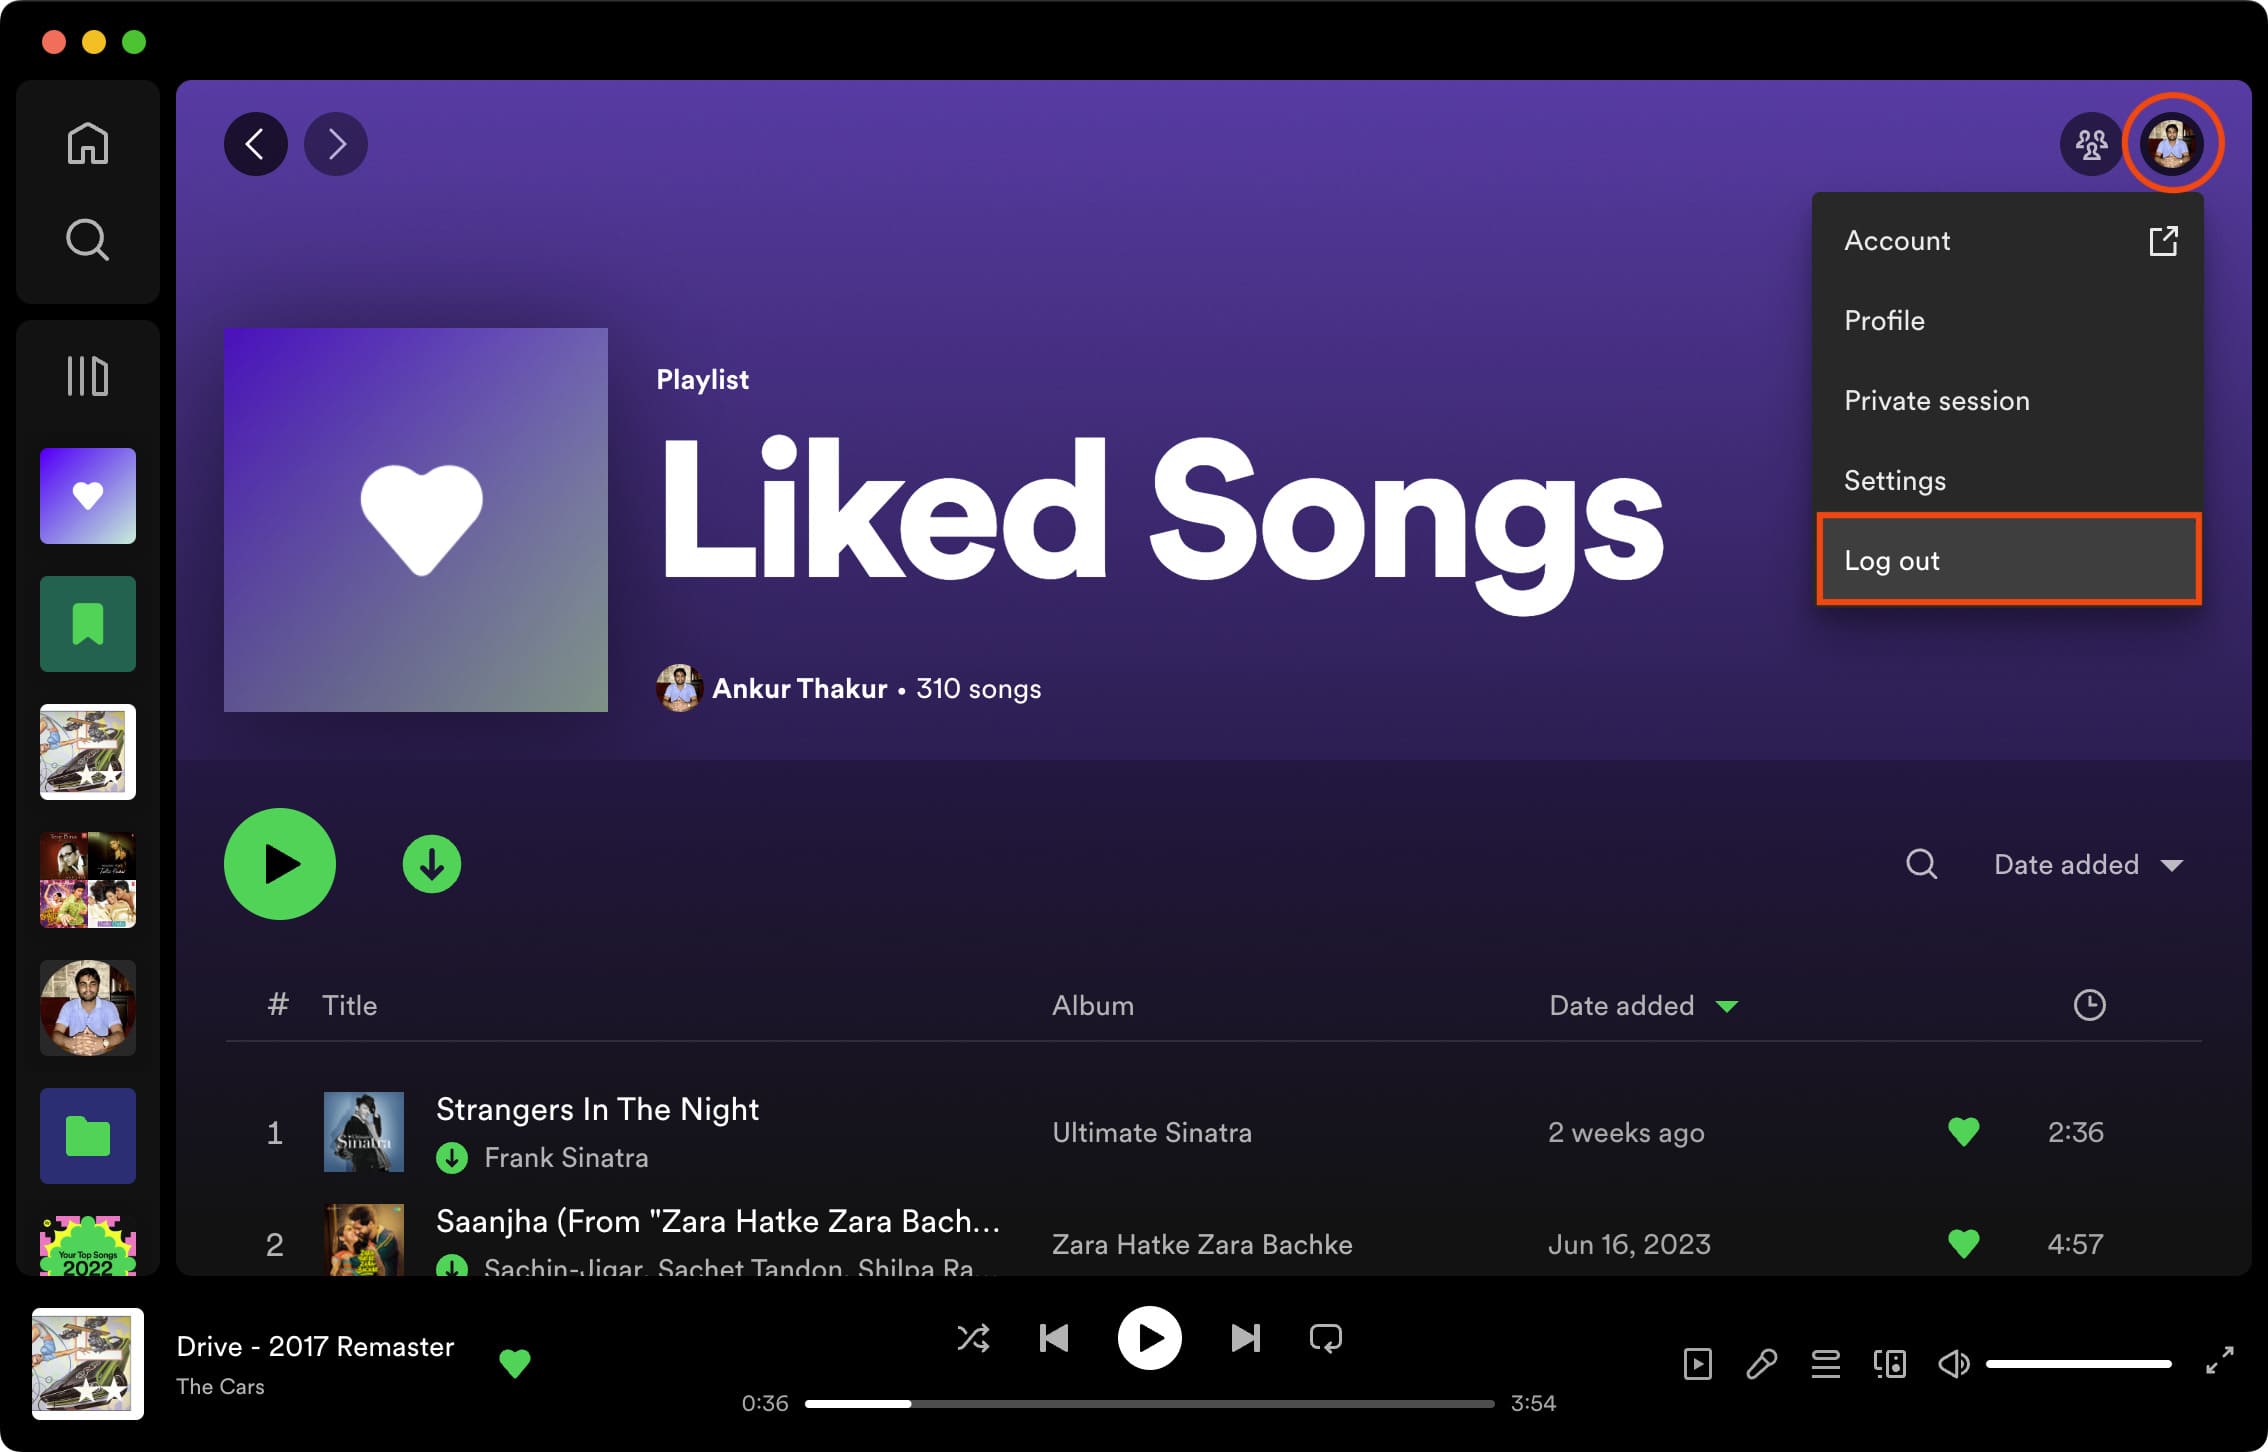 Log out from Spotify on Mac